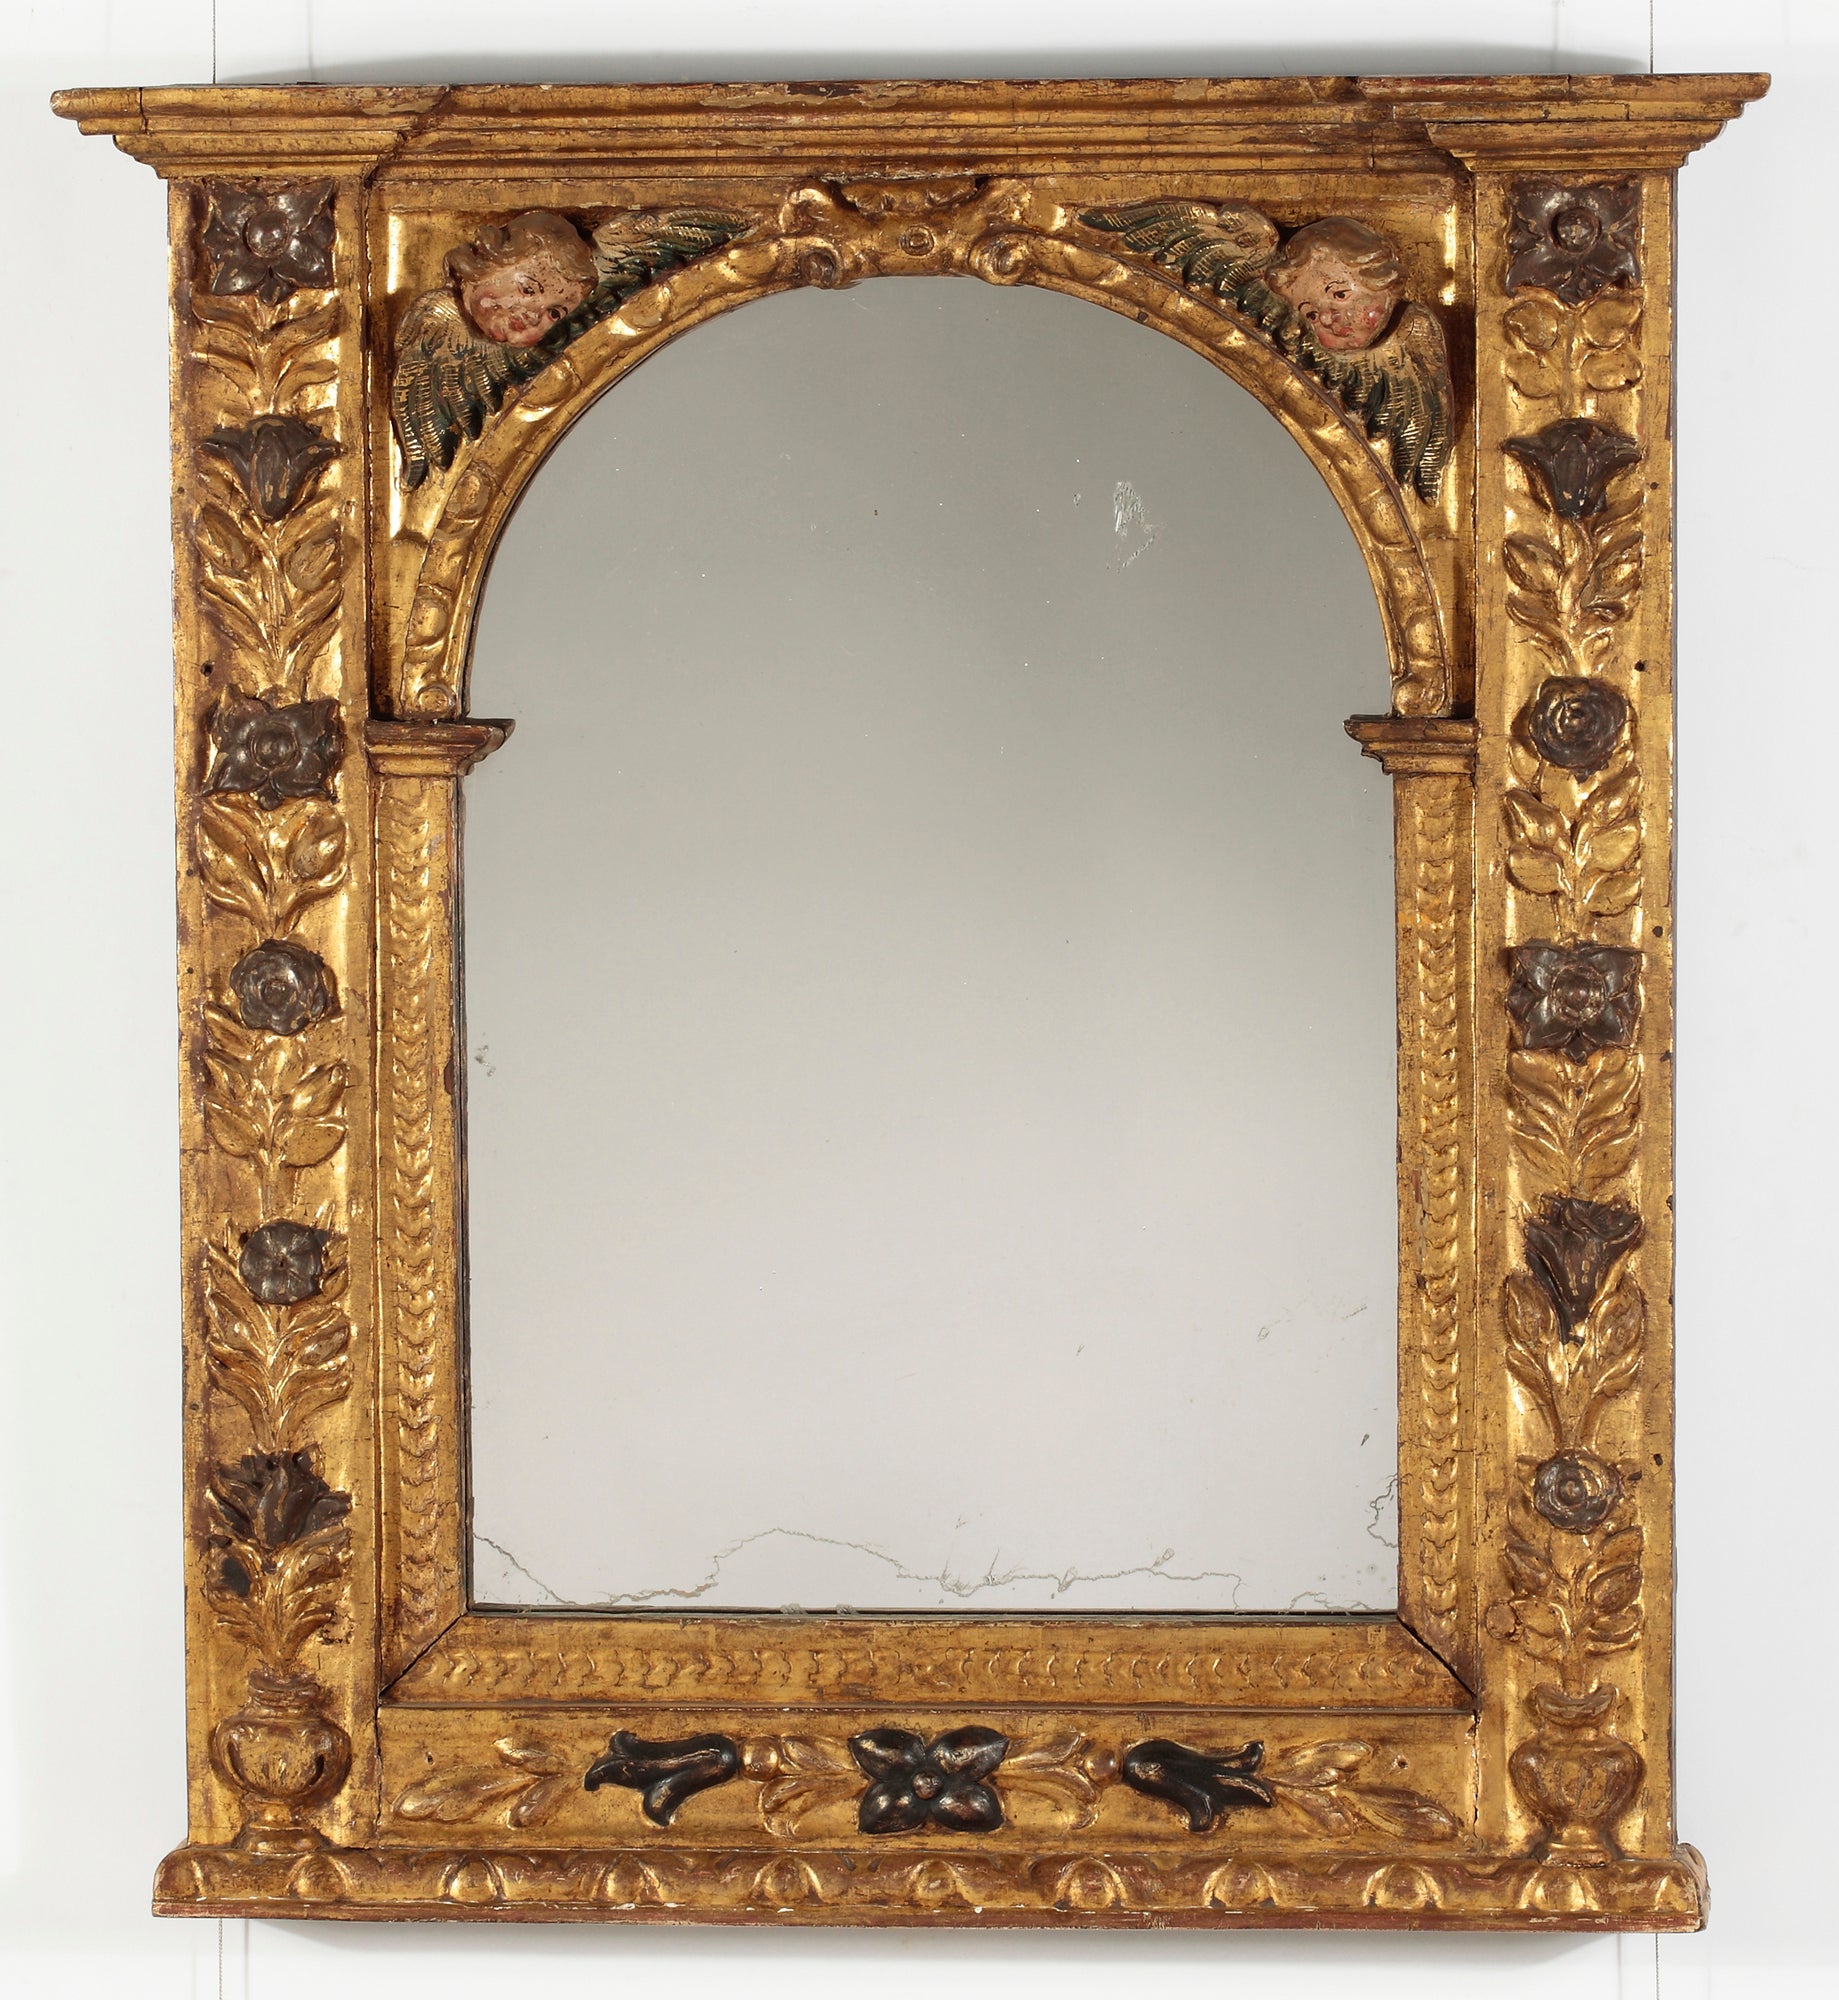 A Baroque Giltwood & Polychrome Frame / Mirror, Late 17th Century